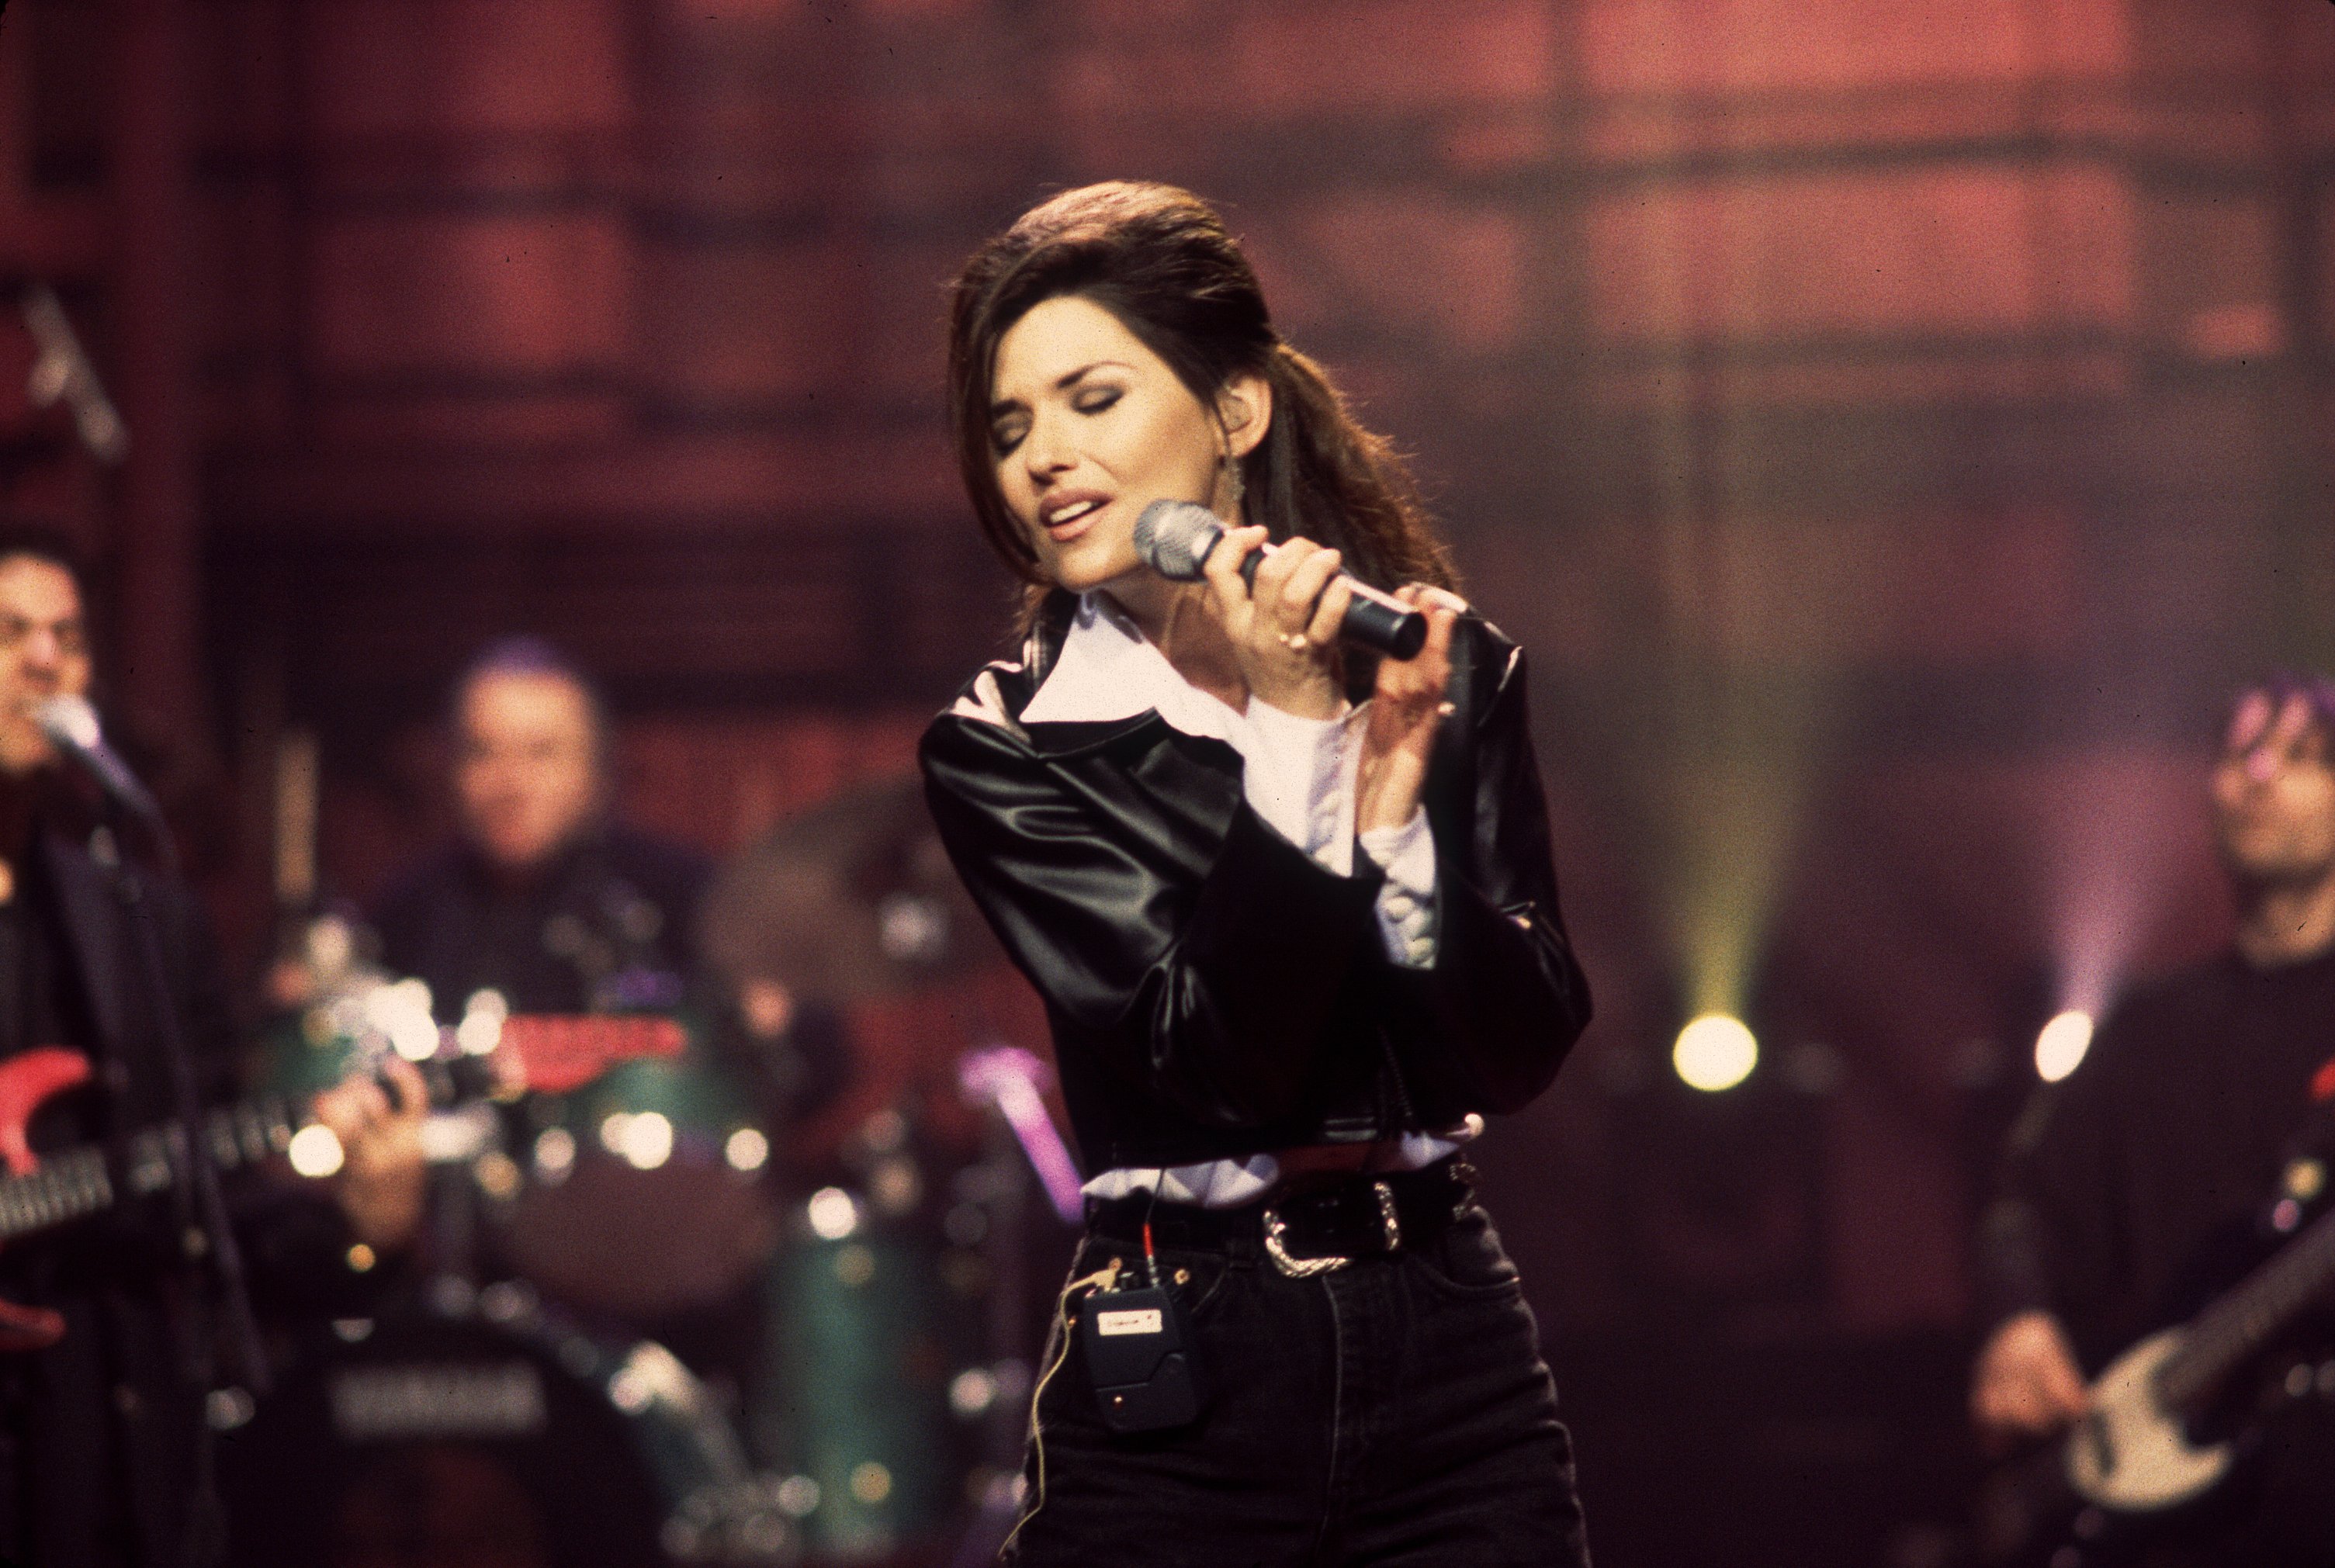 Shania Twain performing a soundcheck for "The David Letterman Show" in New York, 1996 | Photo: Getty Images 